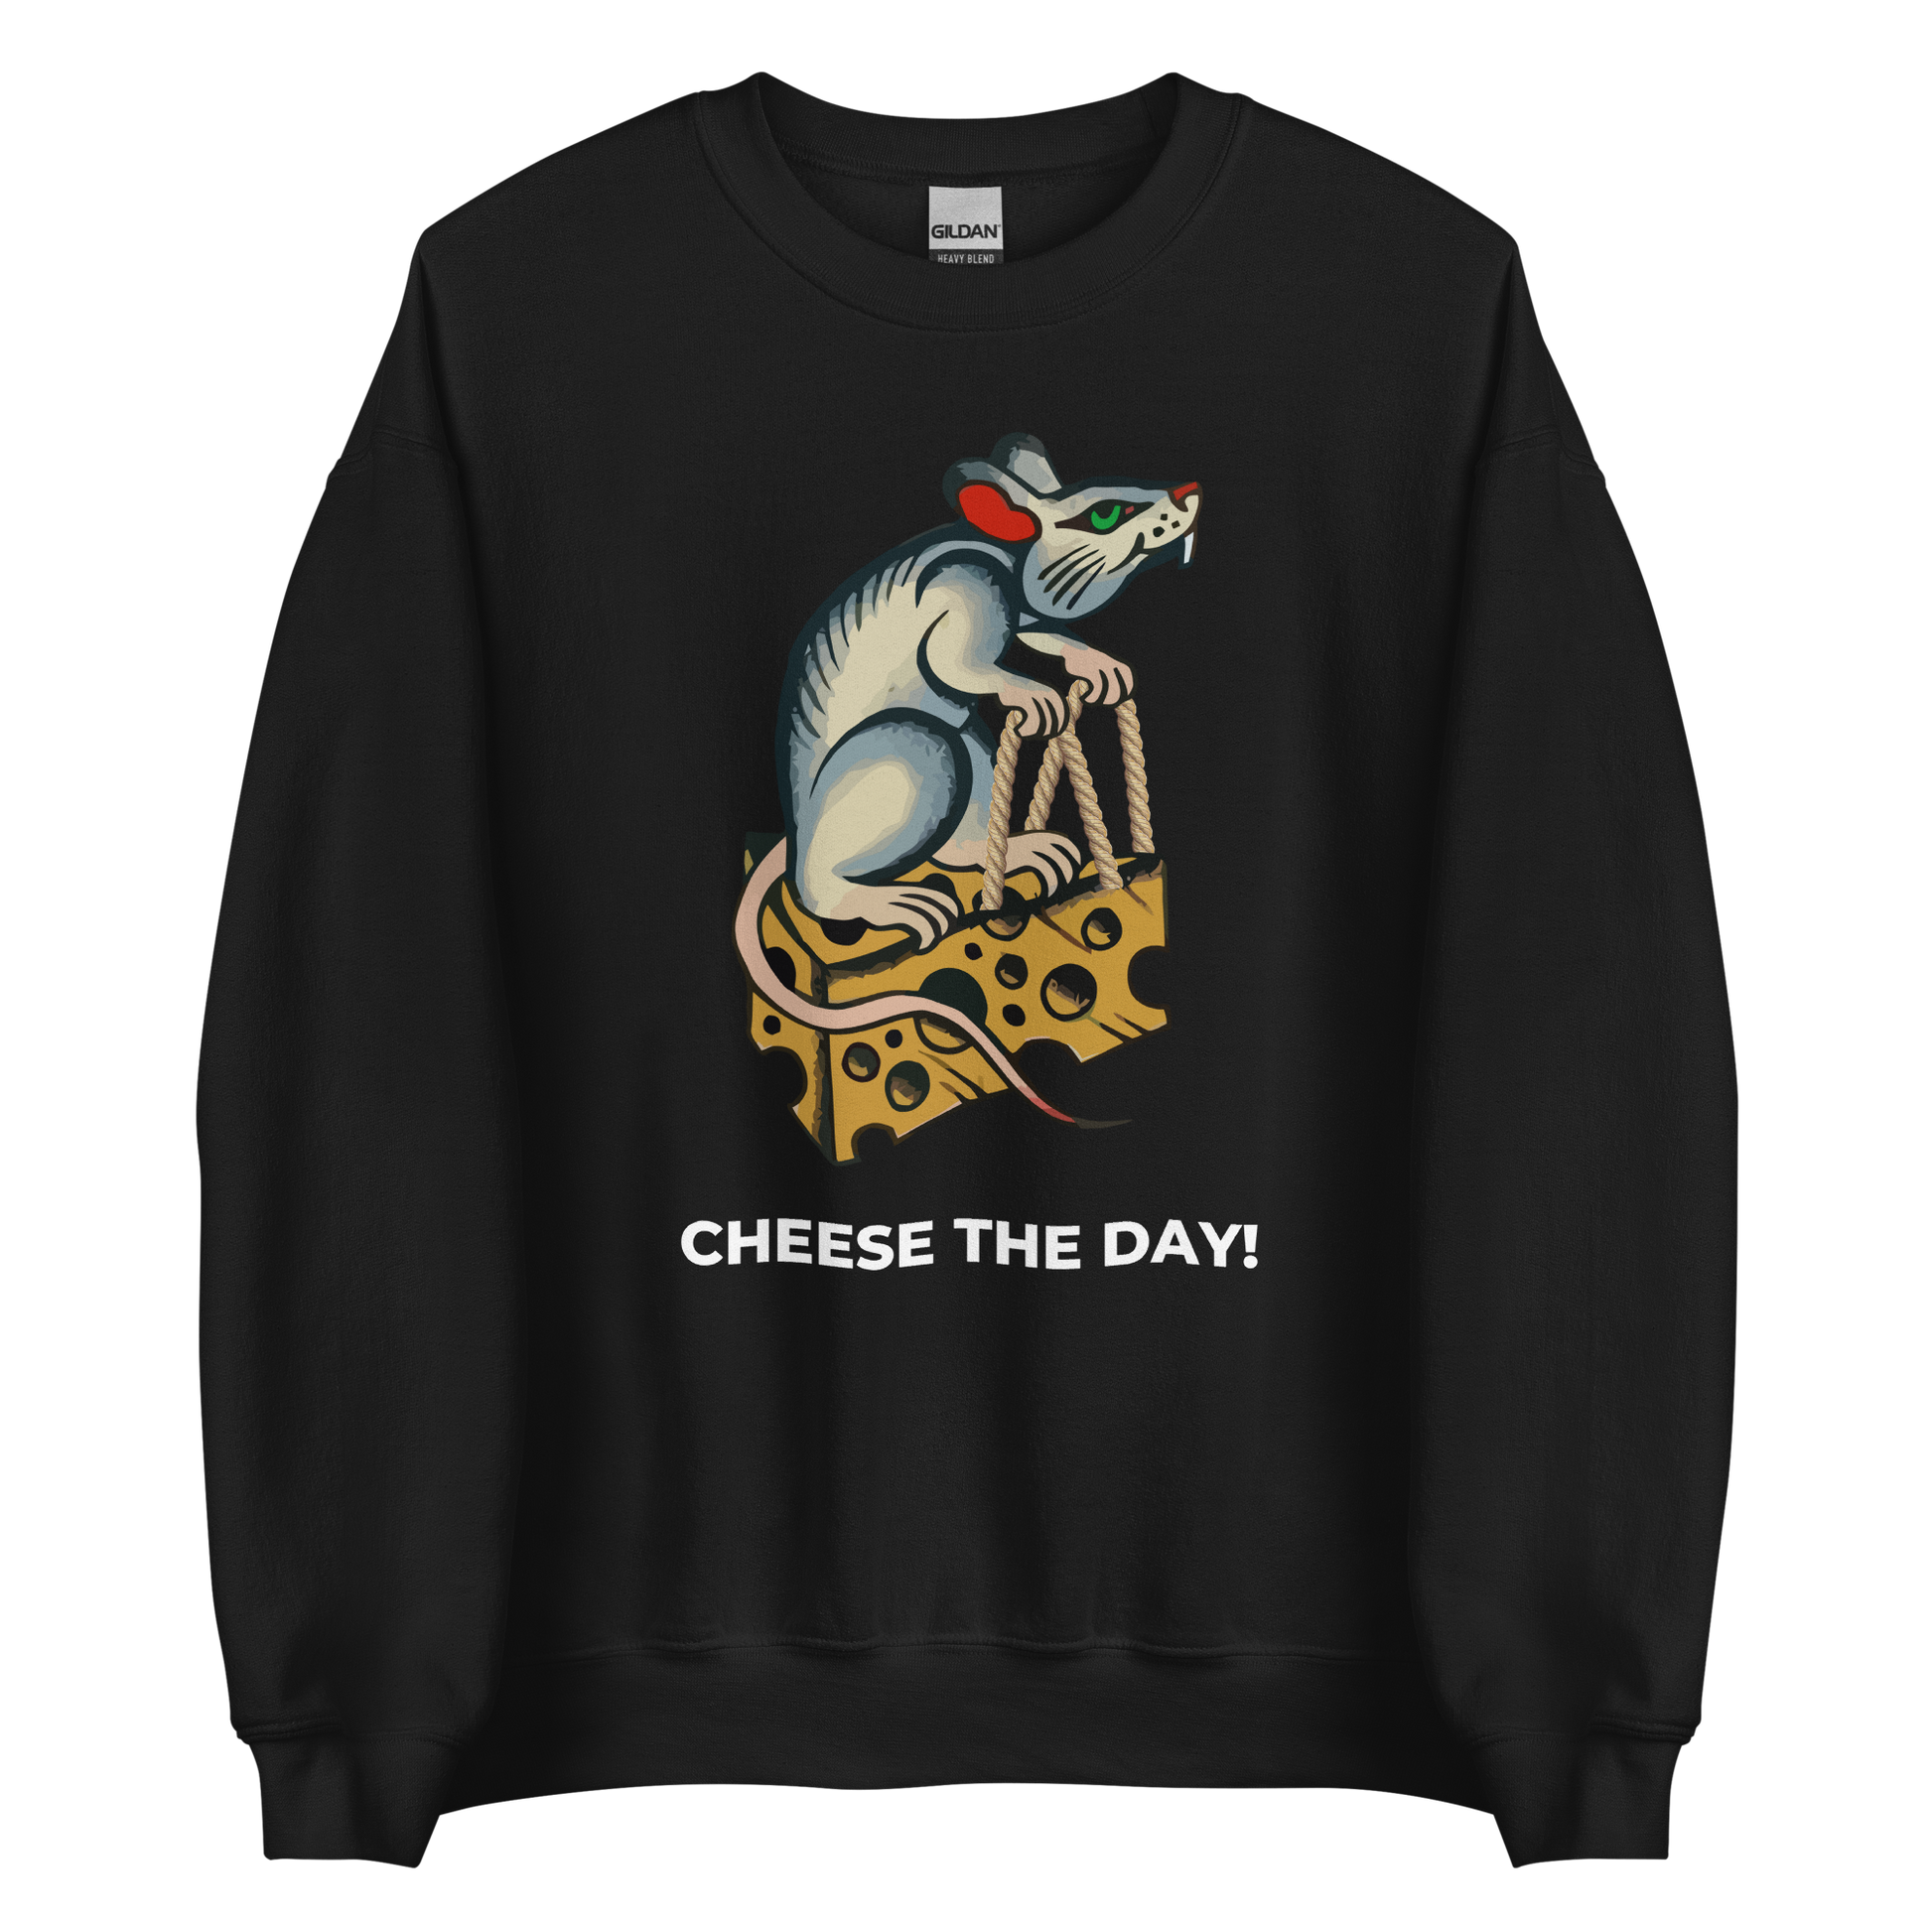 Black Rat Sweatshirt featuring a hilarious Cheese The Day graphic on the chest - Funny Graphic Rat Sweatshirts - Boozy Fox